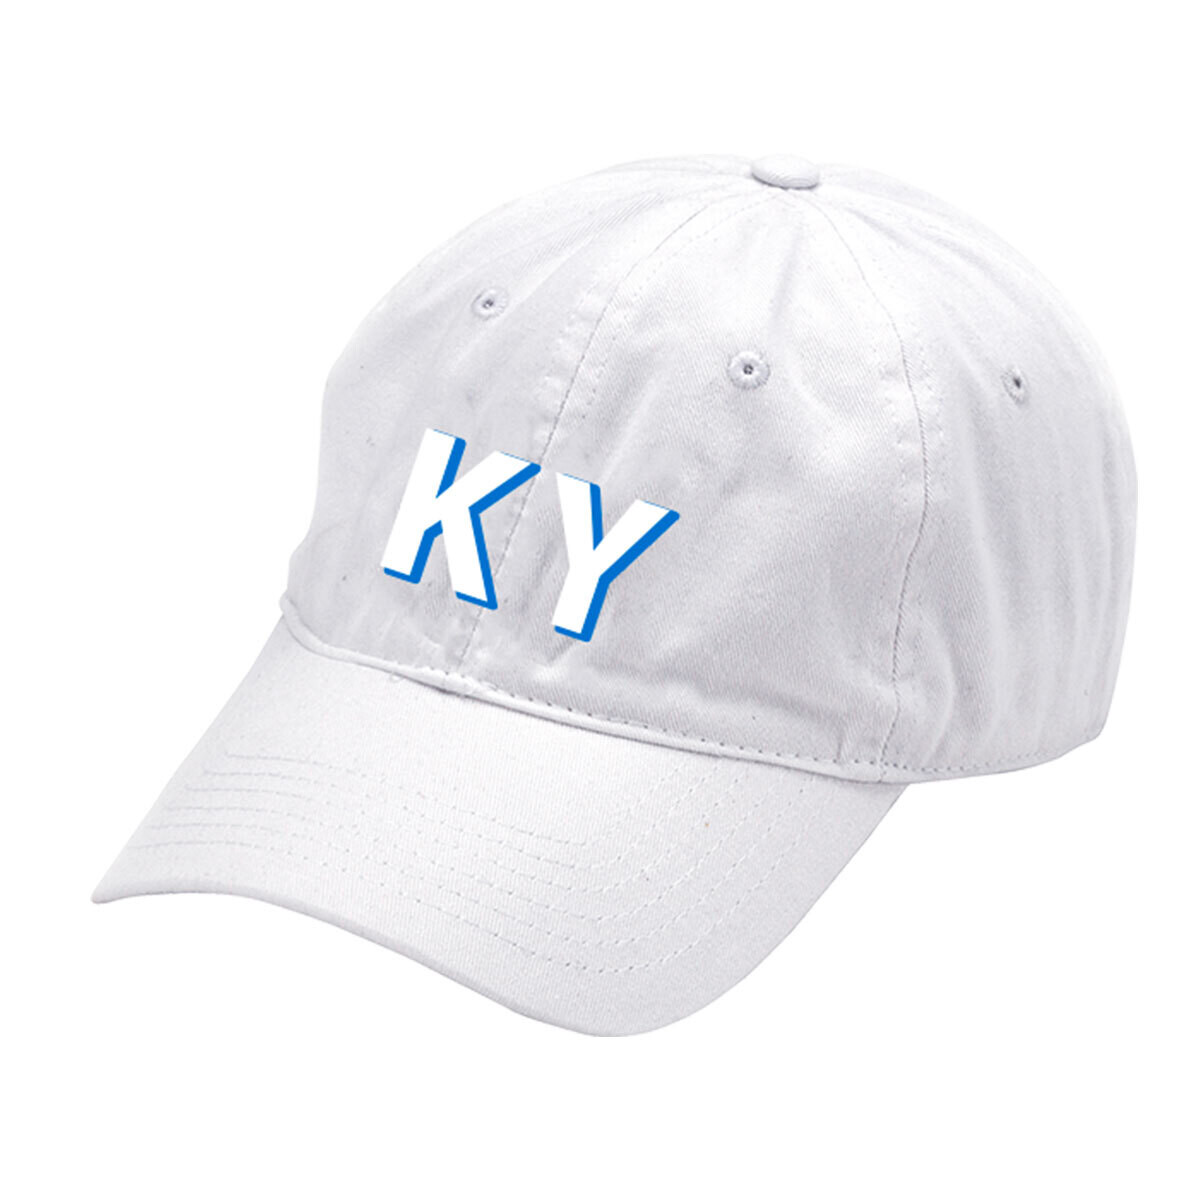 KY Shadow Back White Cap